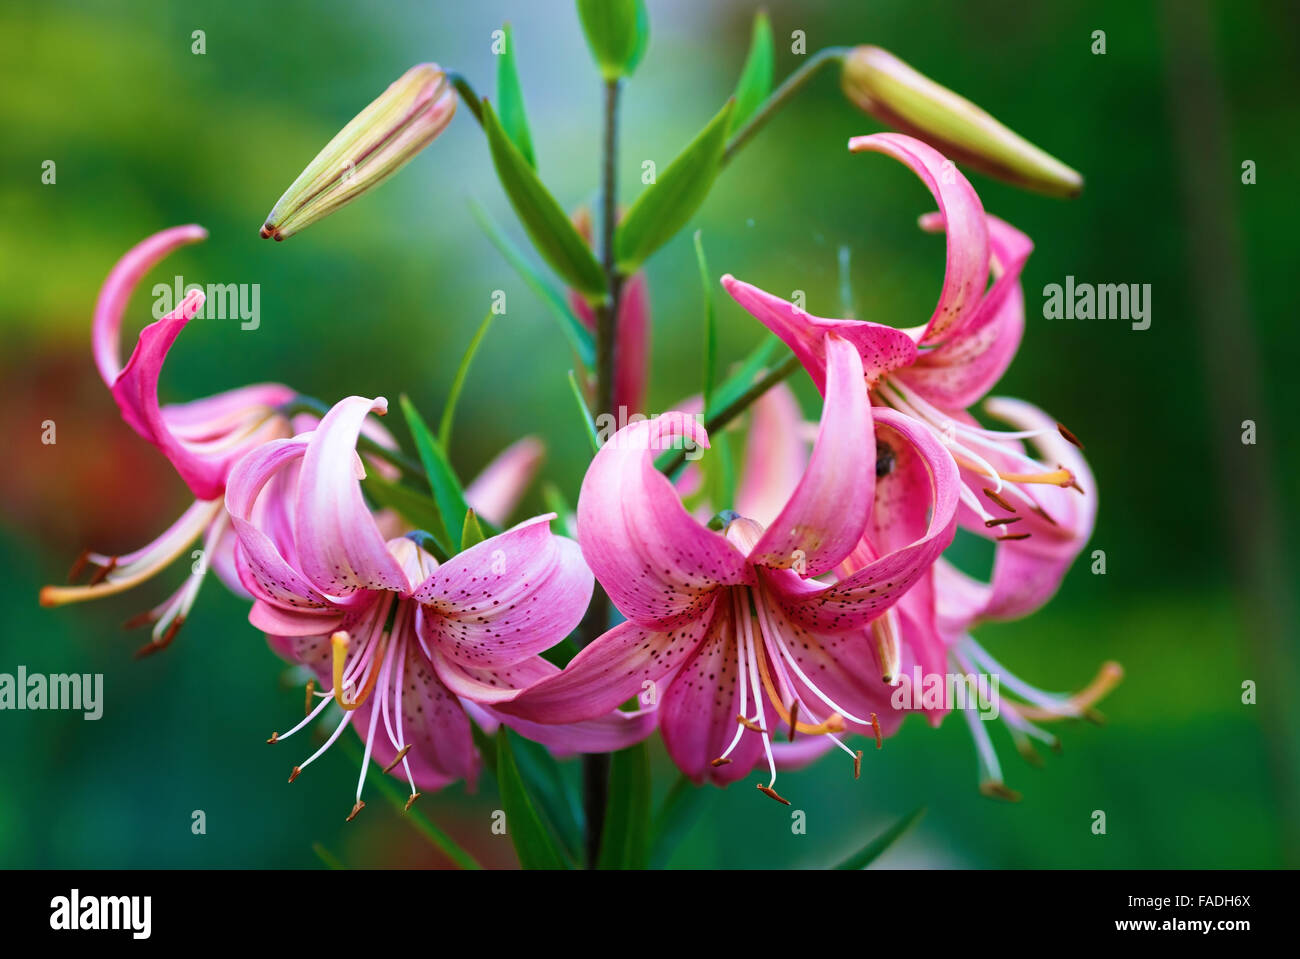 Beautiful pink lily flowers on a blurred background of green leaves outdoors. Shallow depth of field. Selective focus. Stock Photo